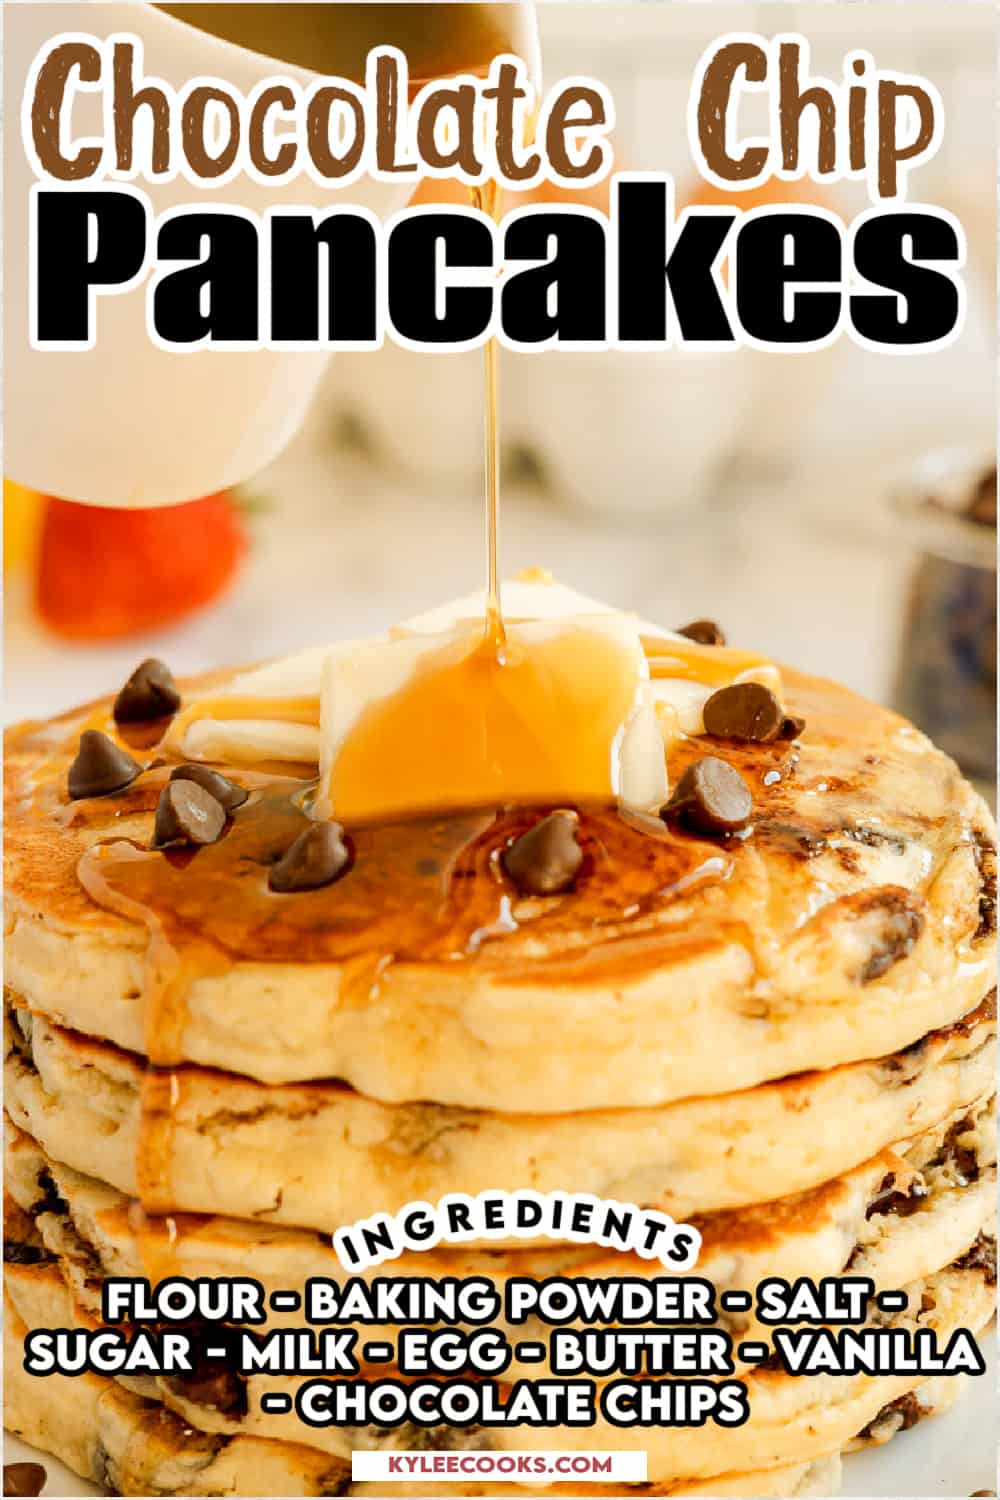 chocolate chip pancakes with recipe name overlaid in text.